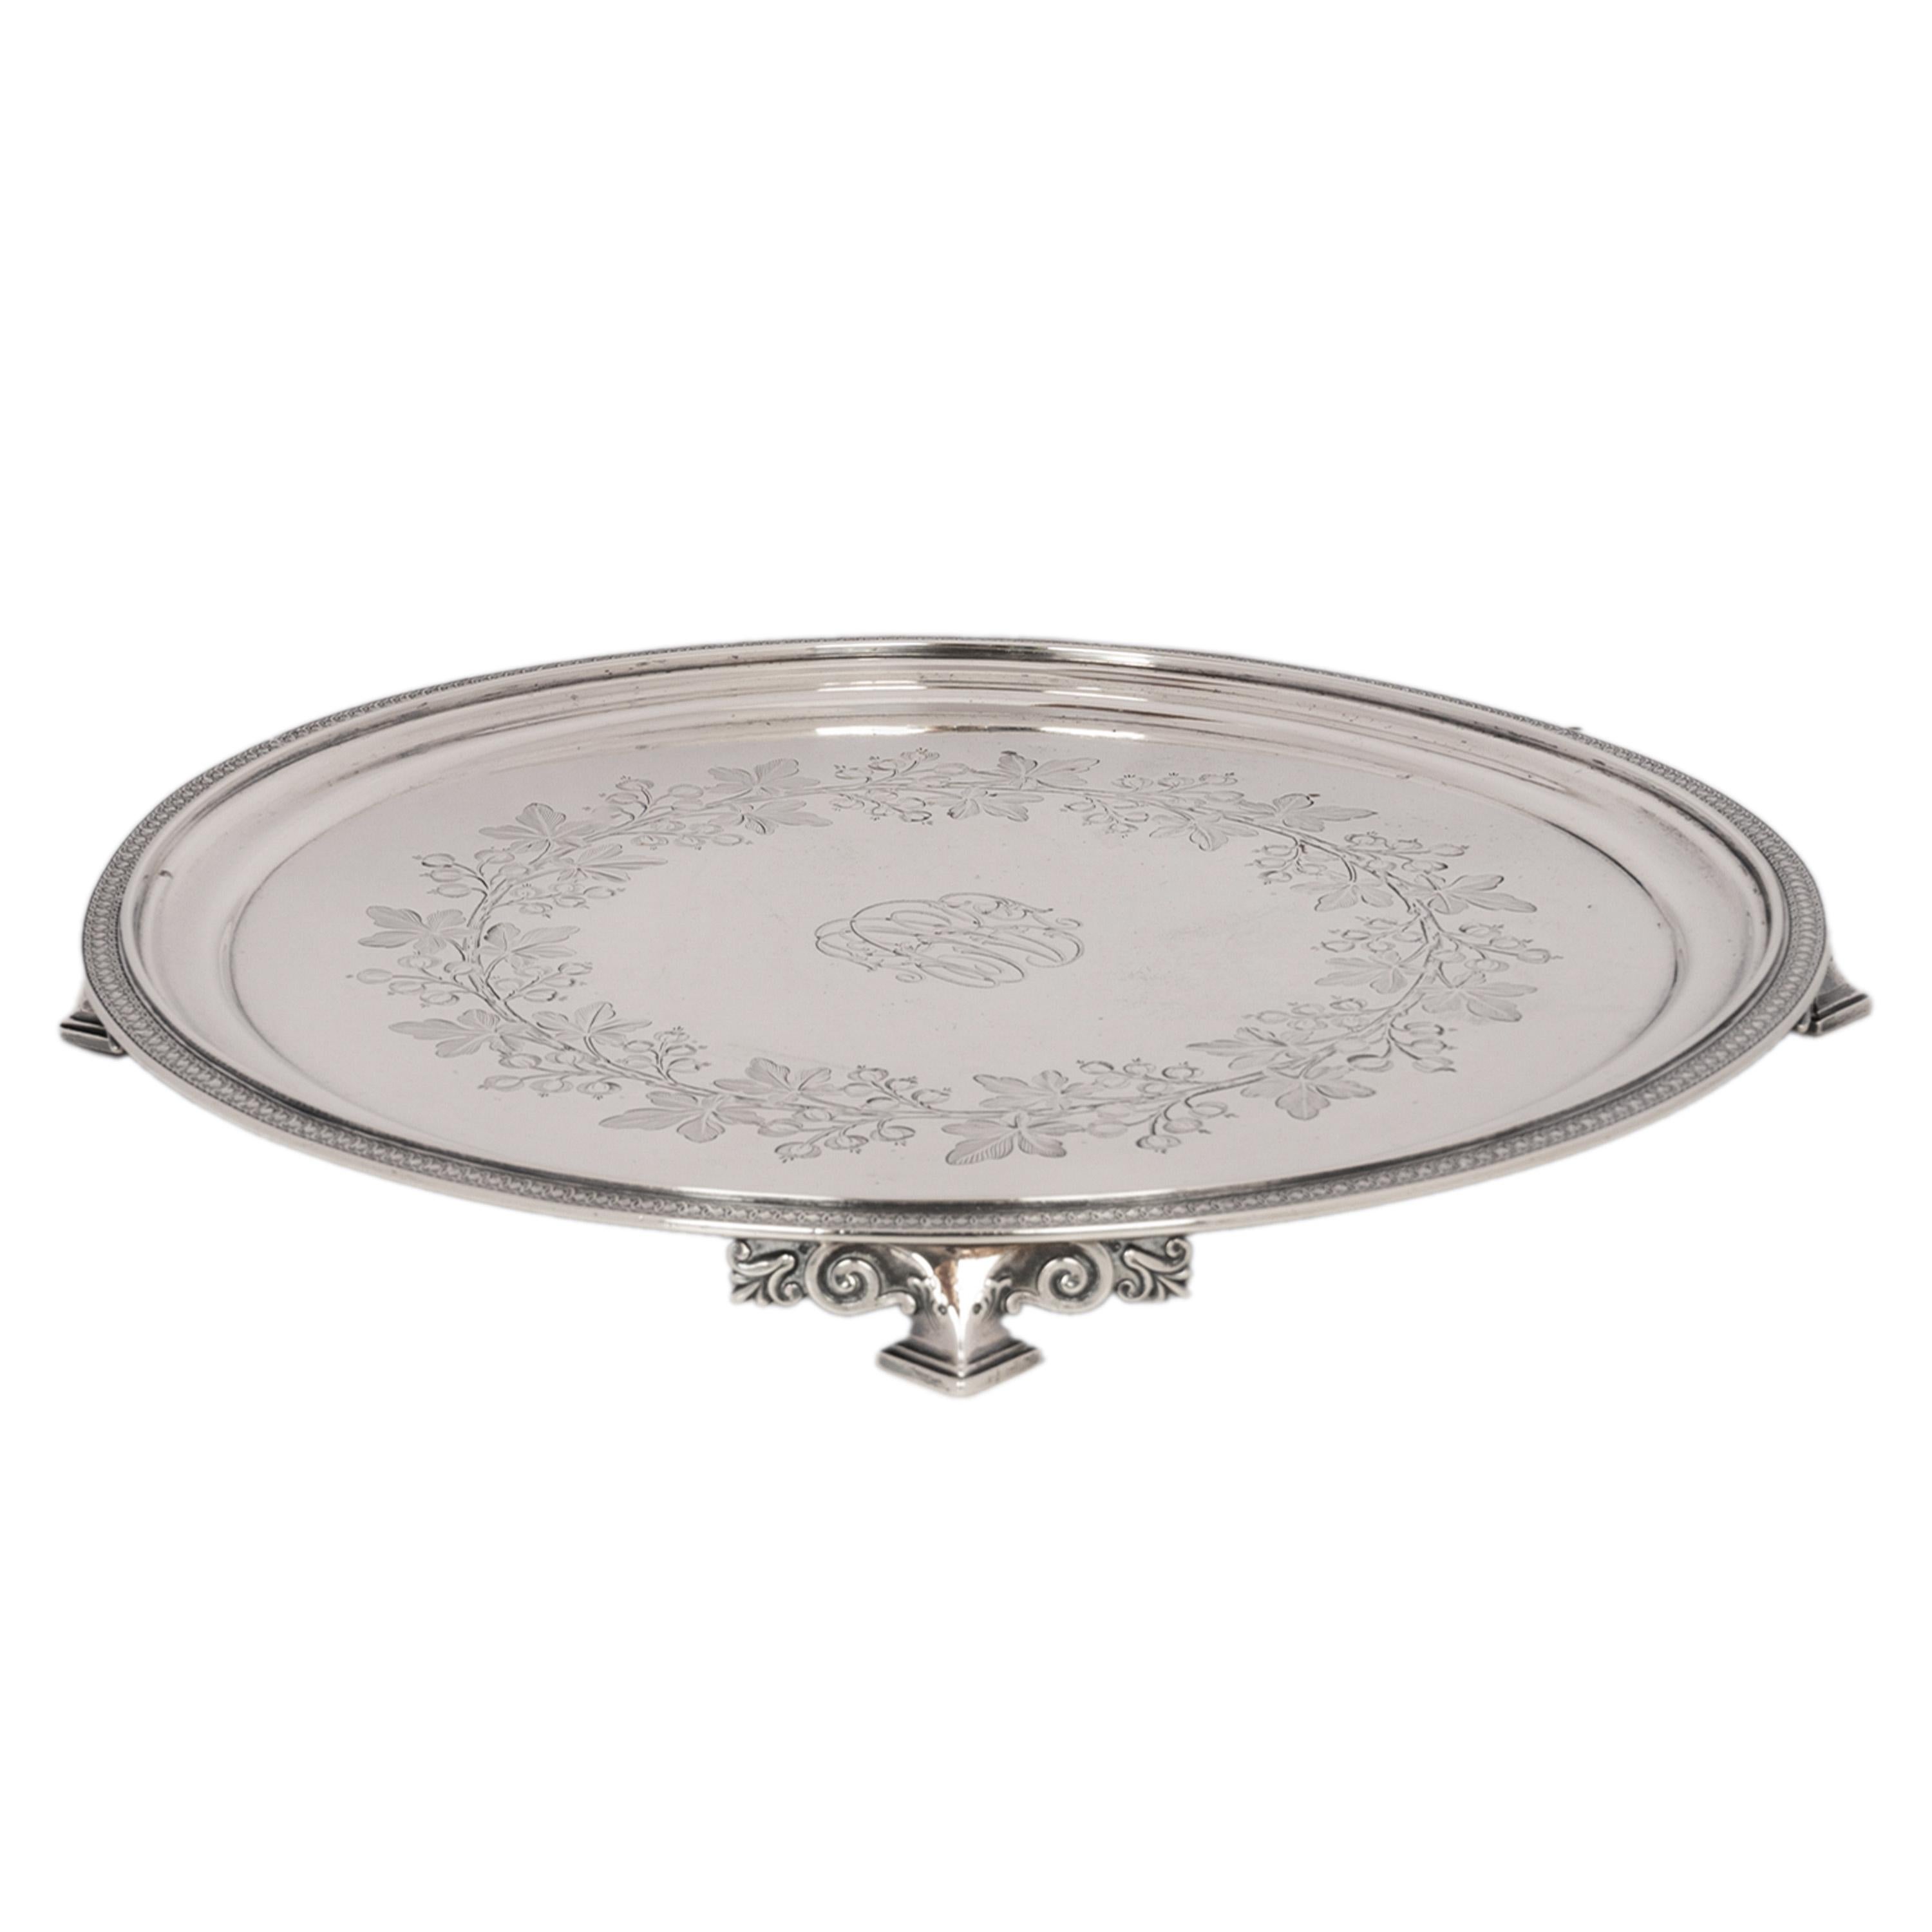 Antique Engraved Sterling Silver Tiffany & Co Footed Salver Tray New York 1870 For Sale 4